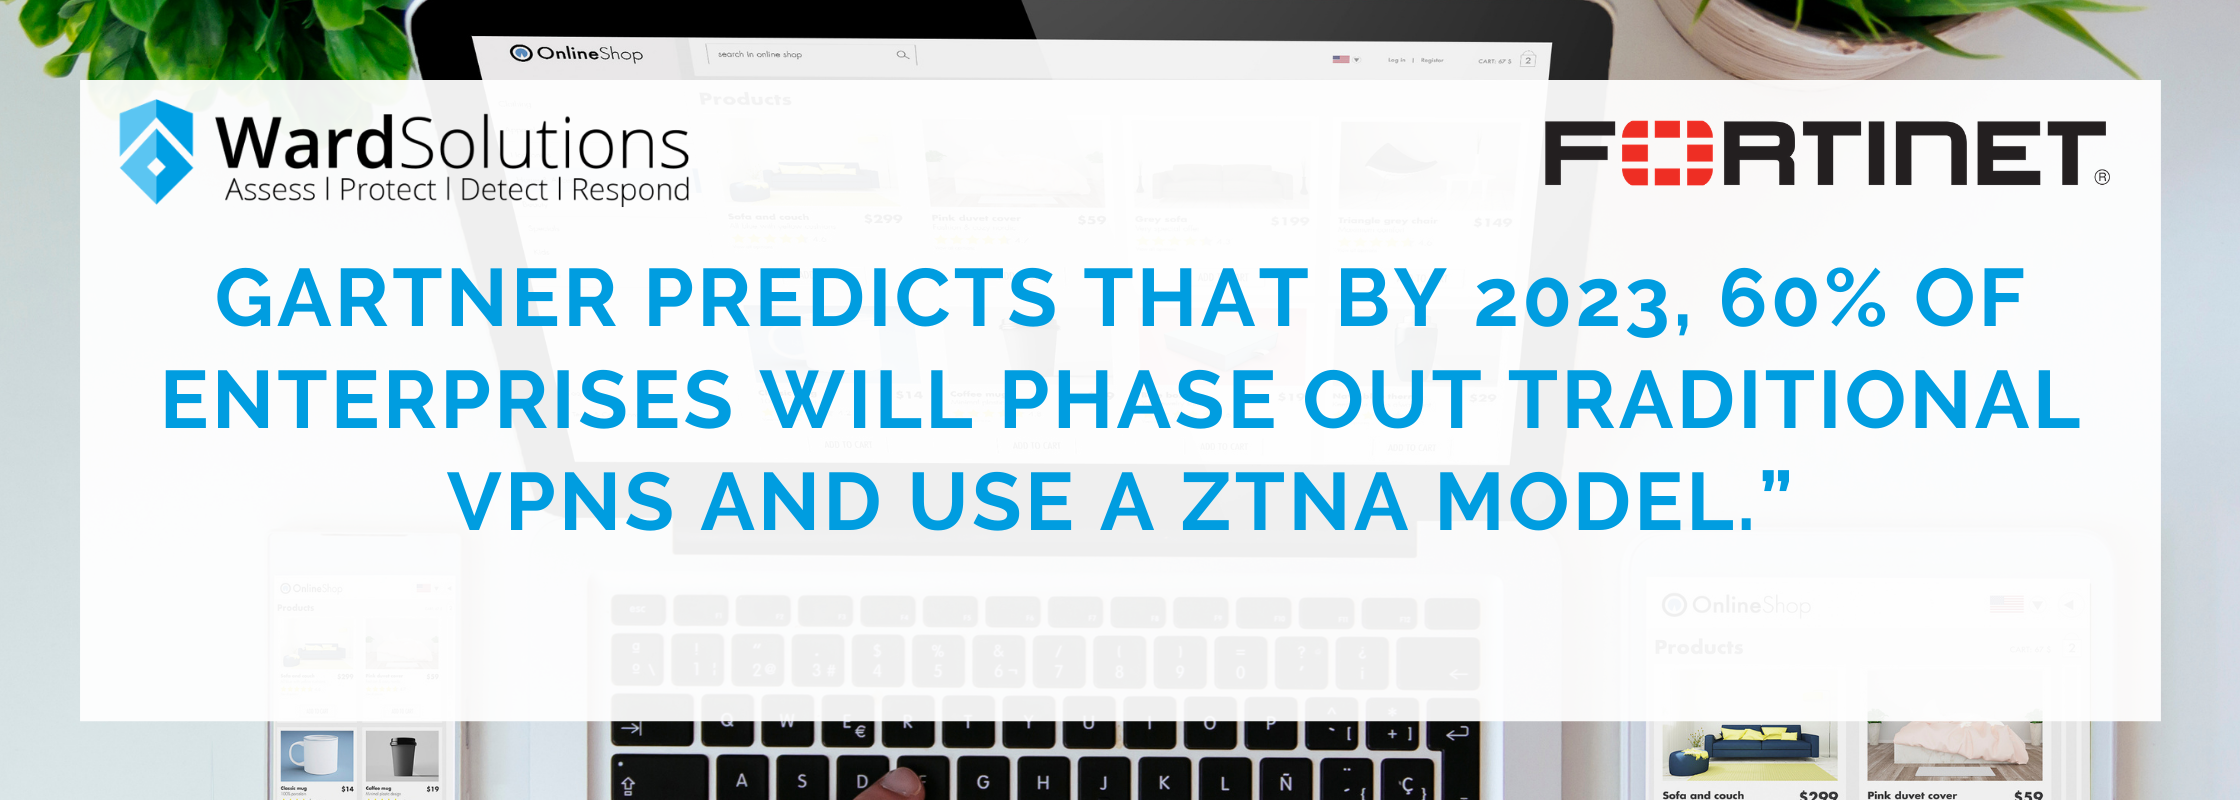 “Gartner predicts that by 2023, 60% of enterprises will phase out traditional VPNs and use a ZTNA model.”